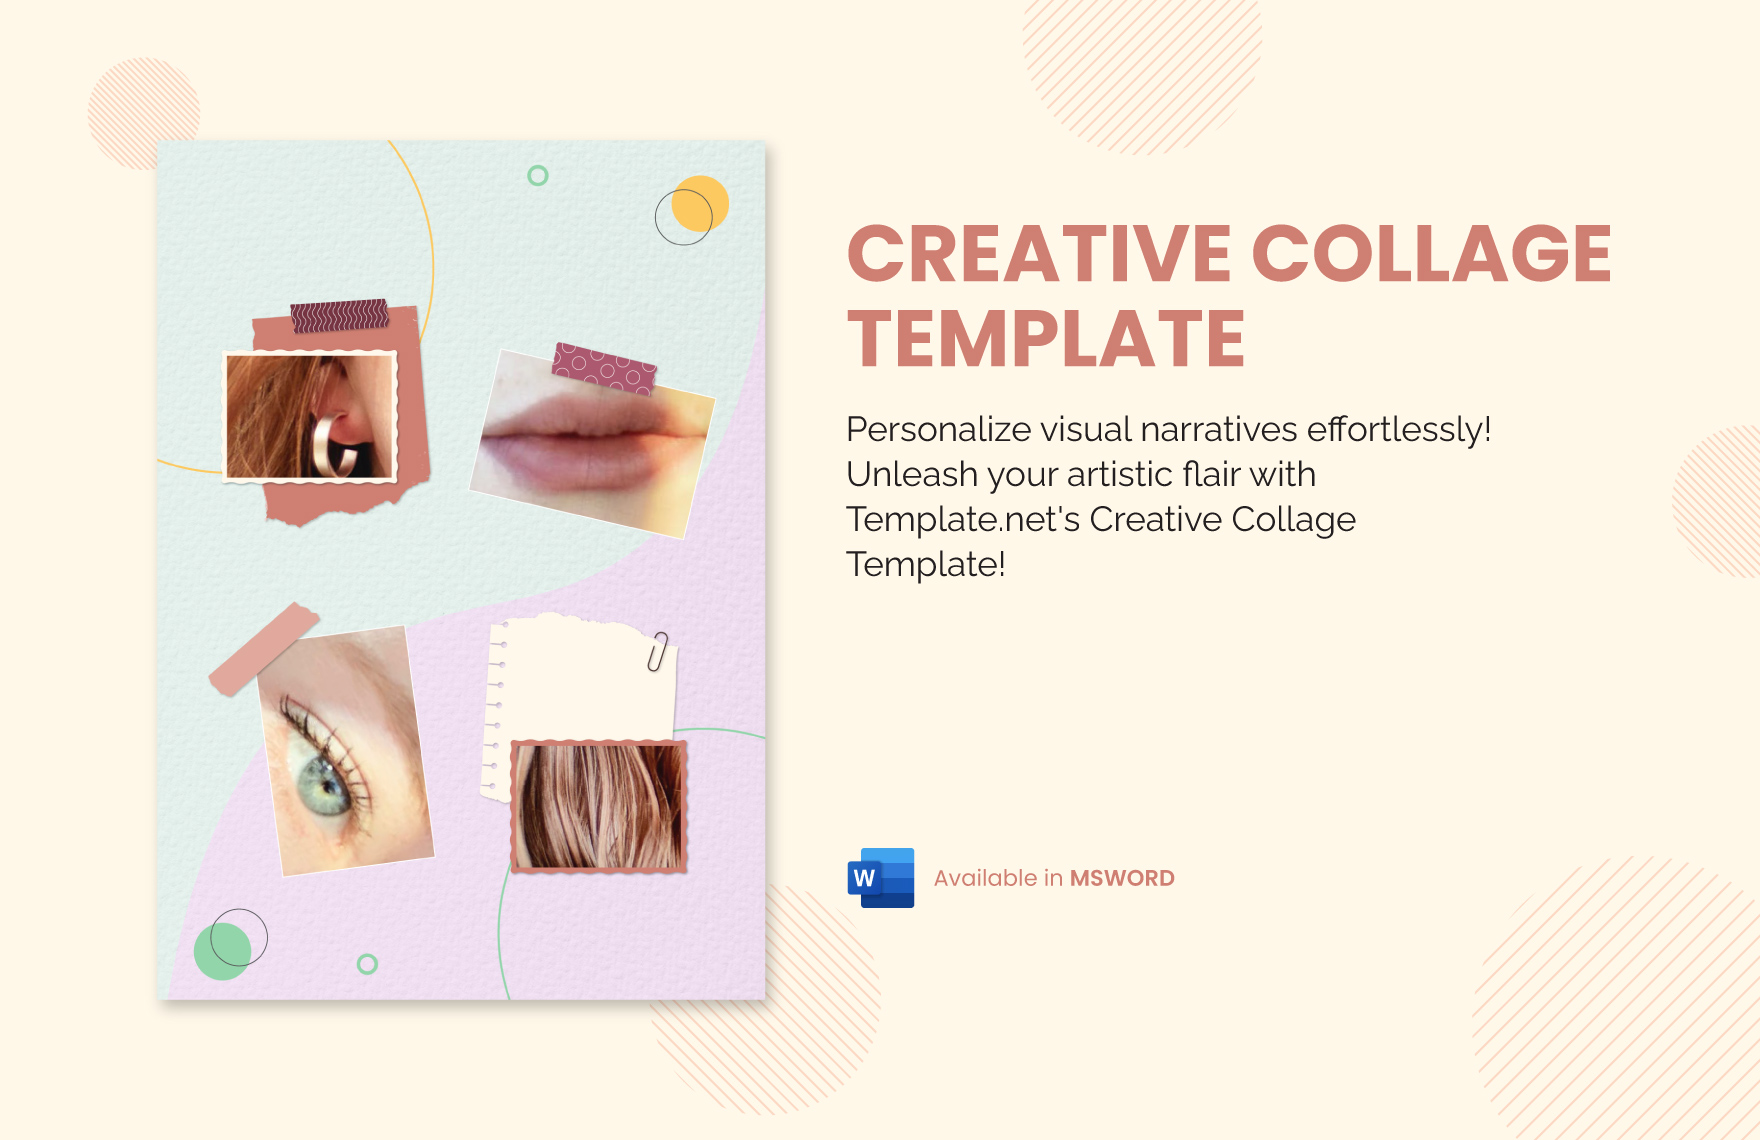 Creative Collage Template